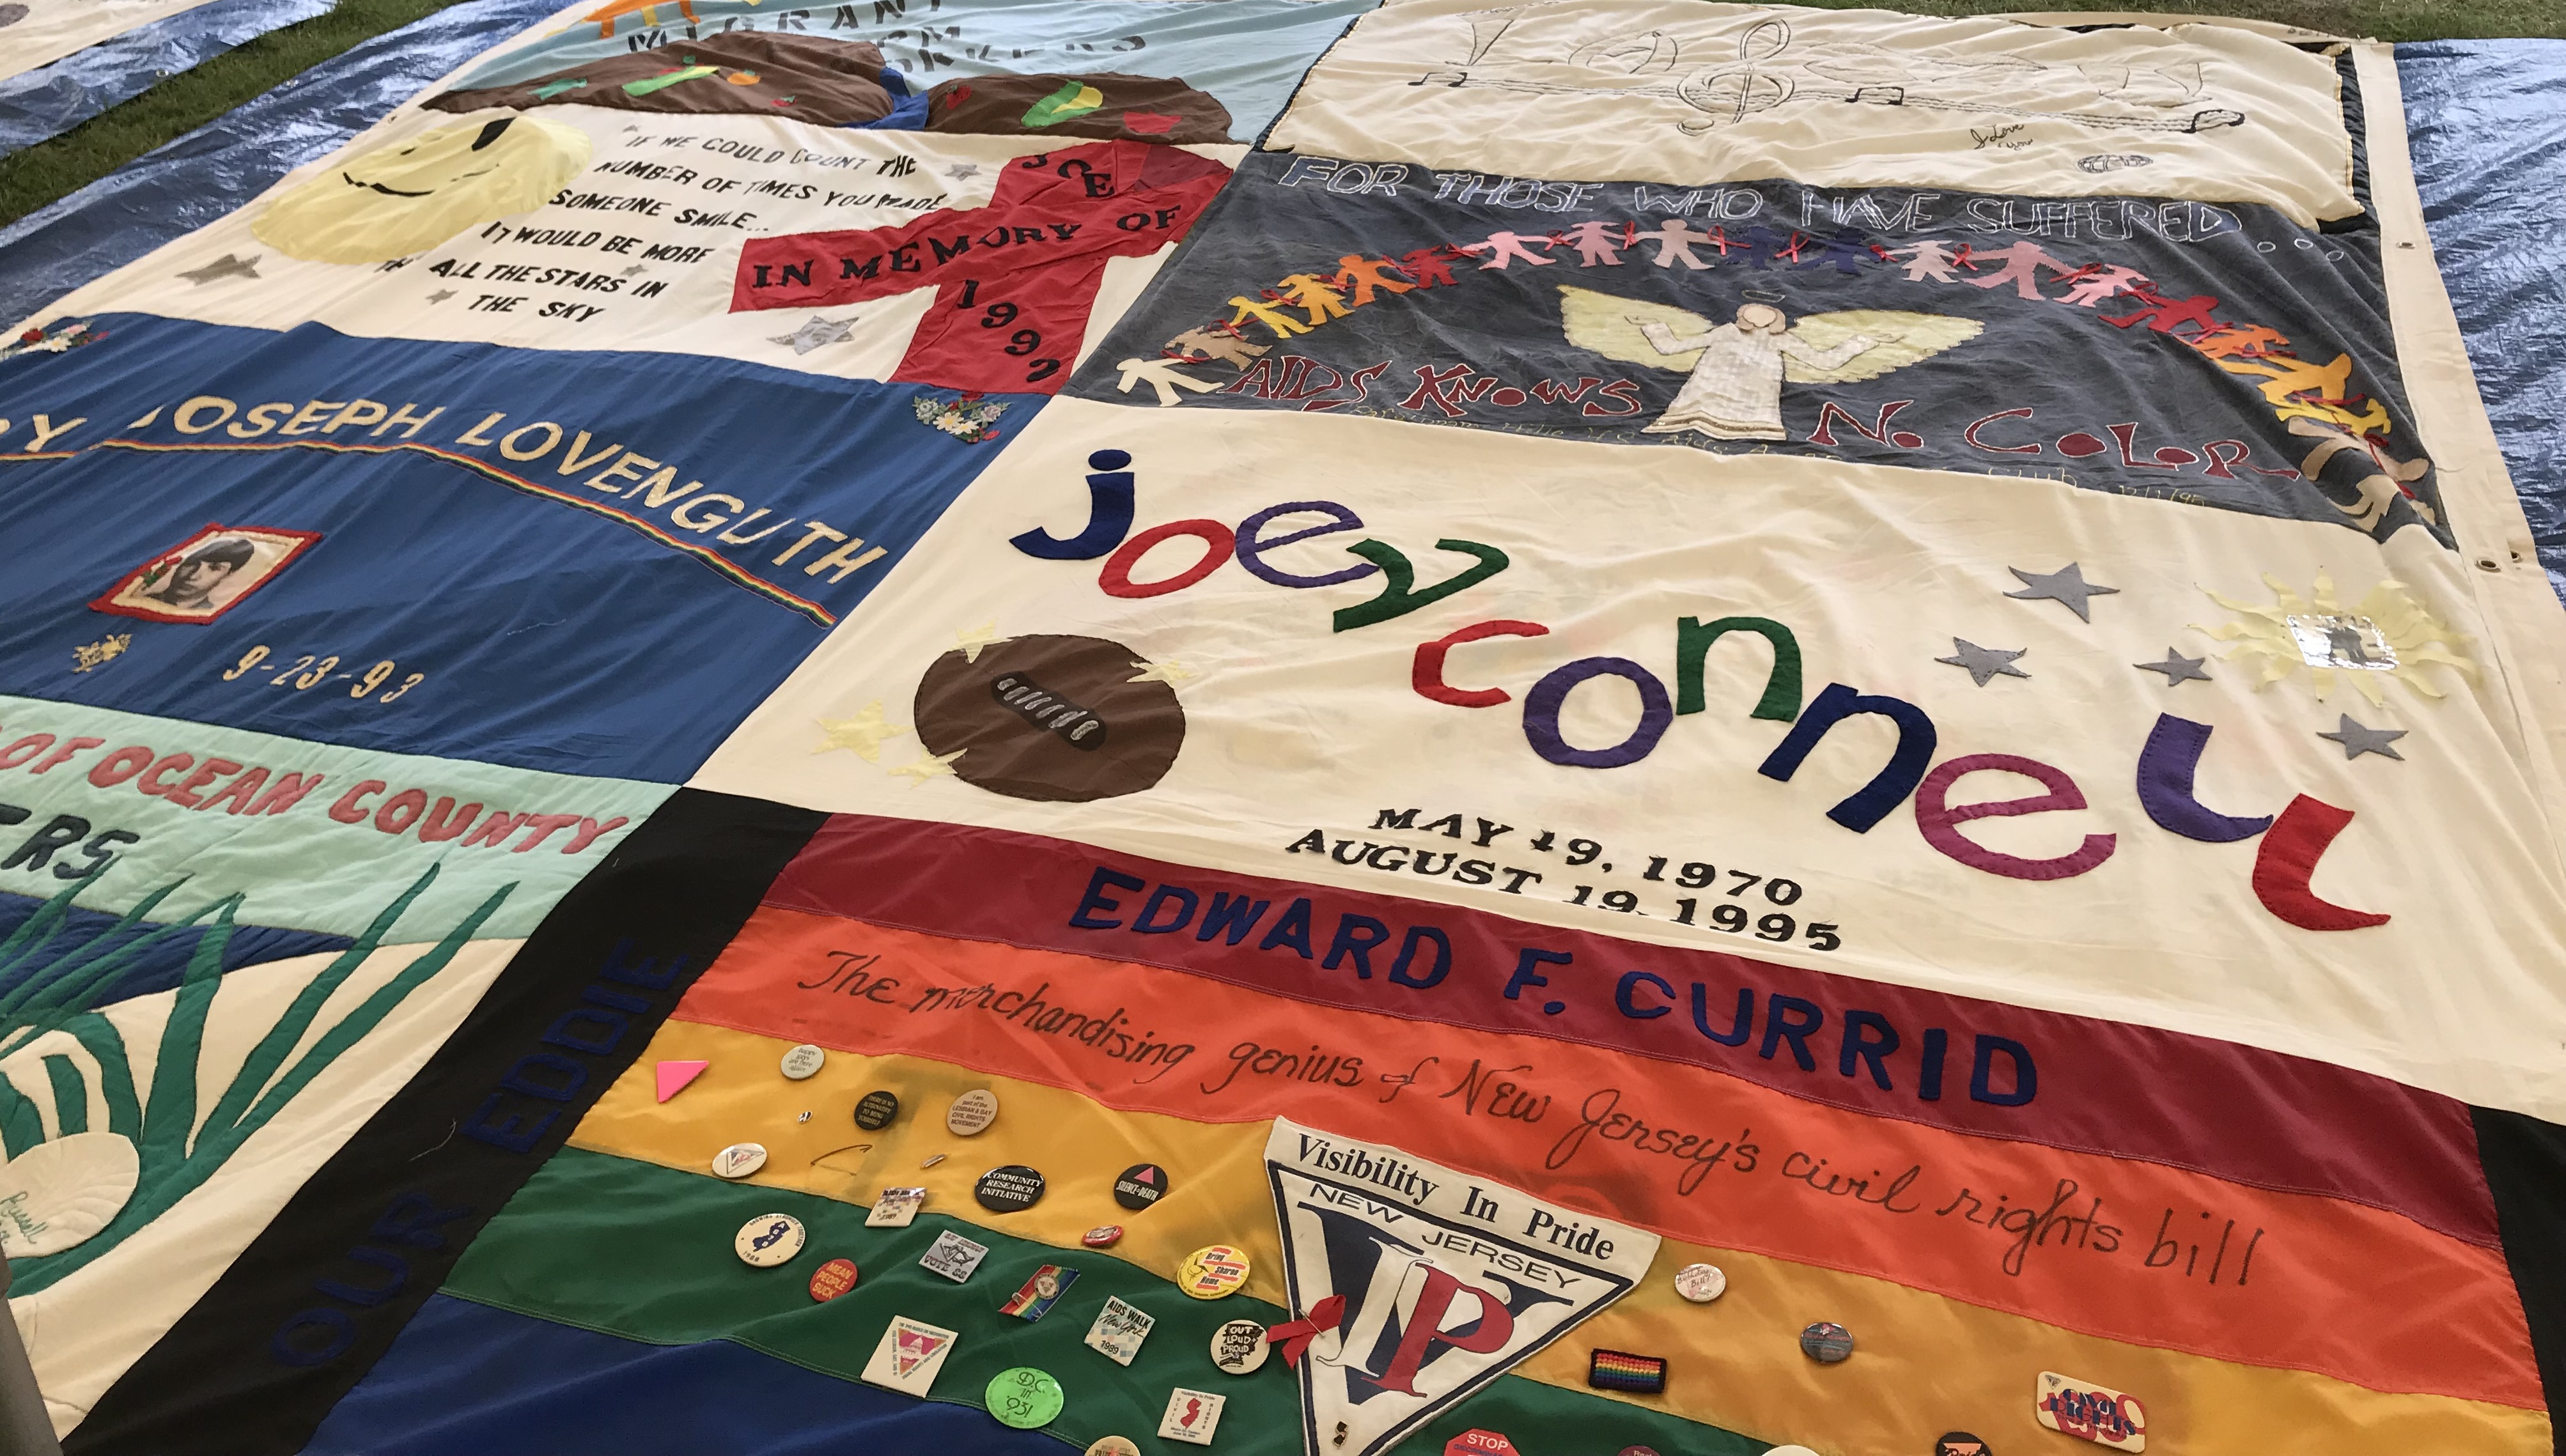 Sections of The AIDS Quilt